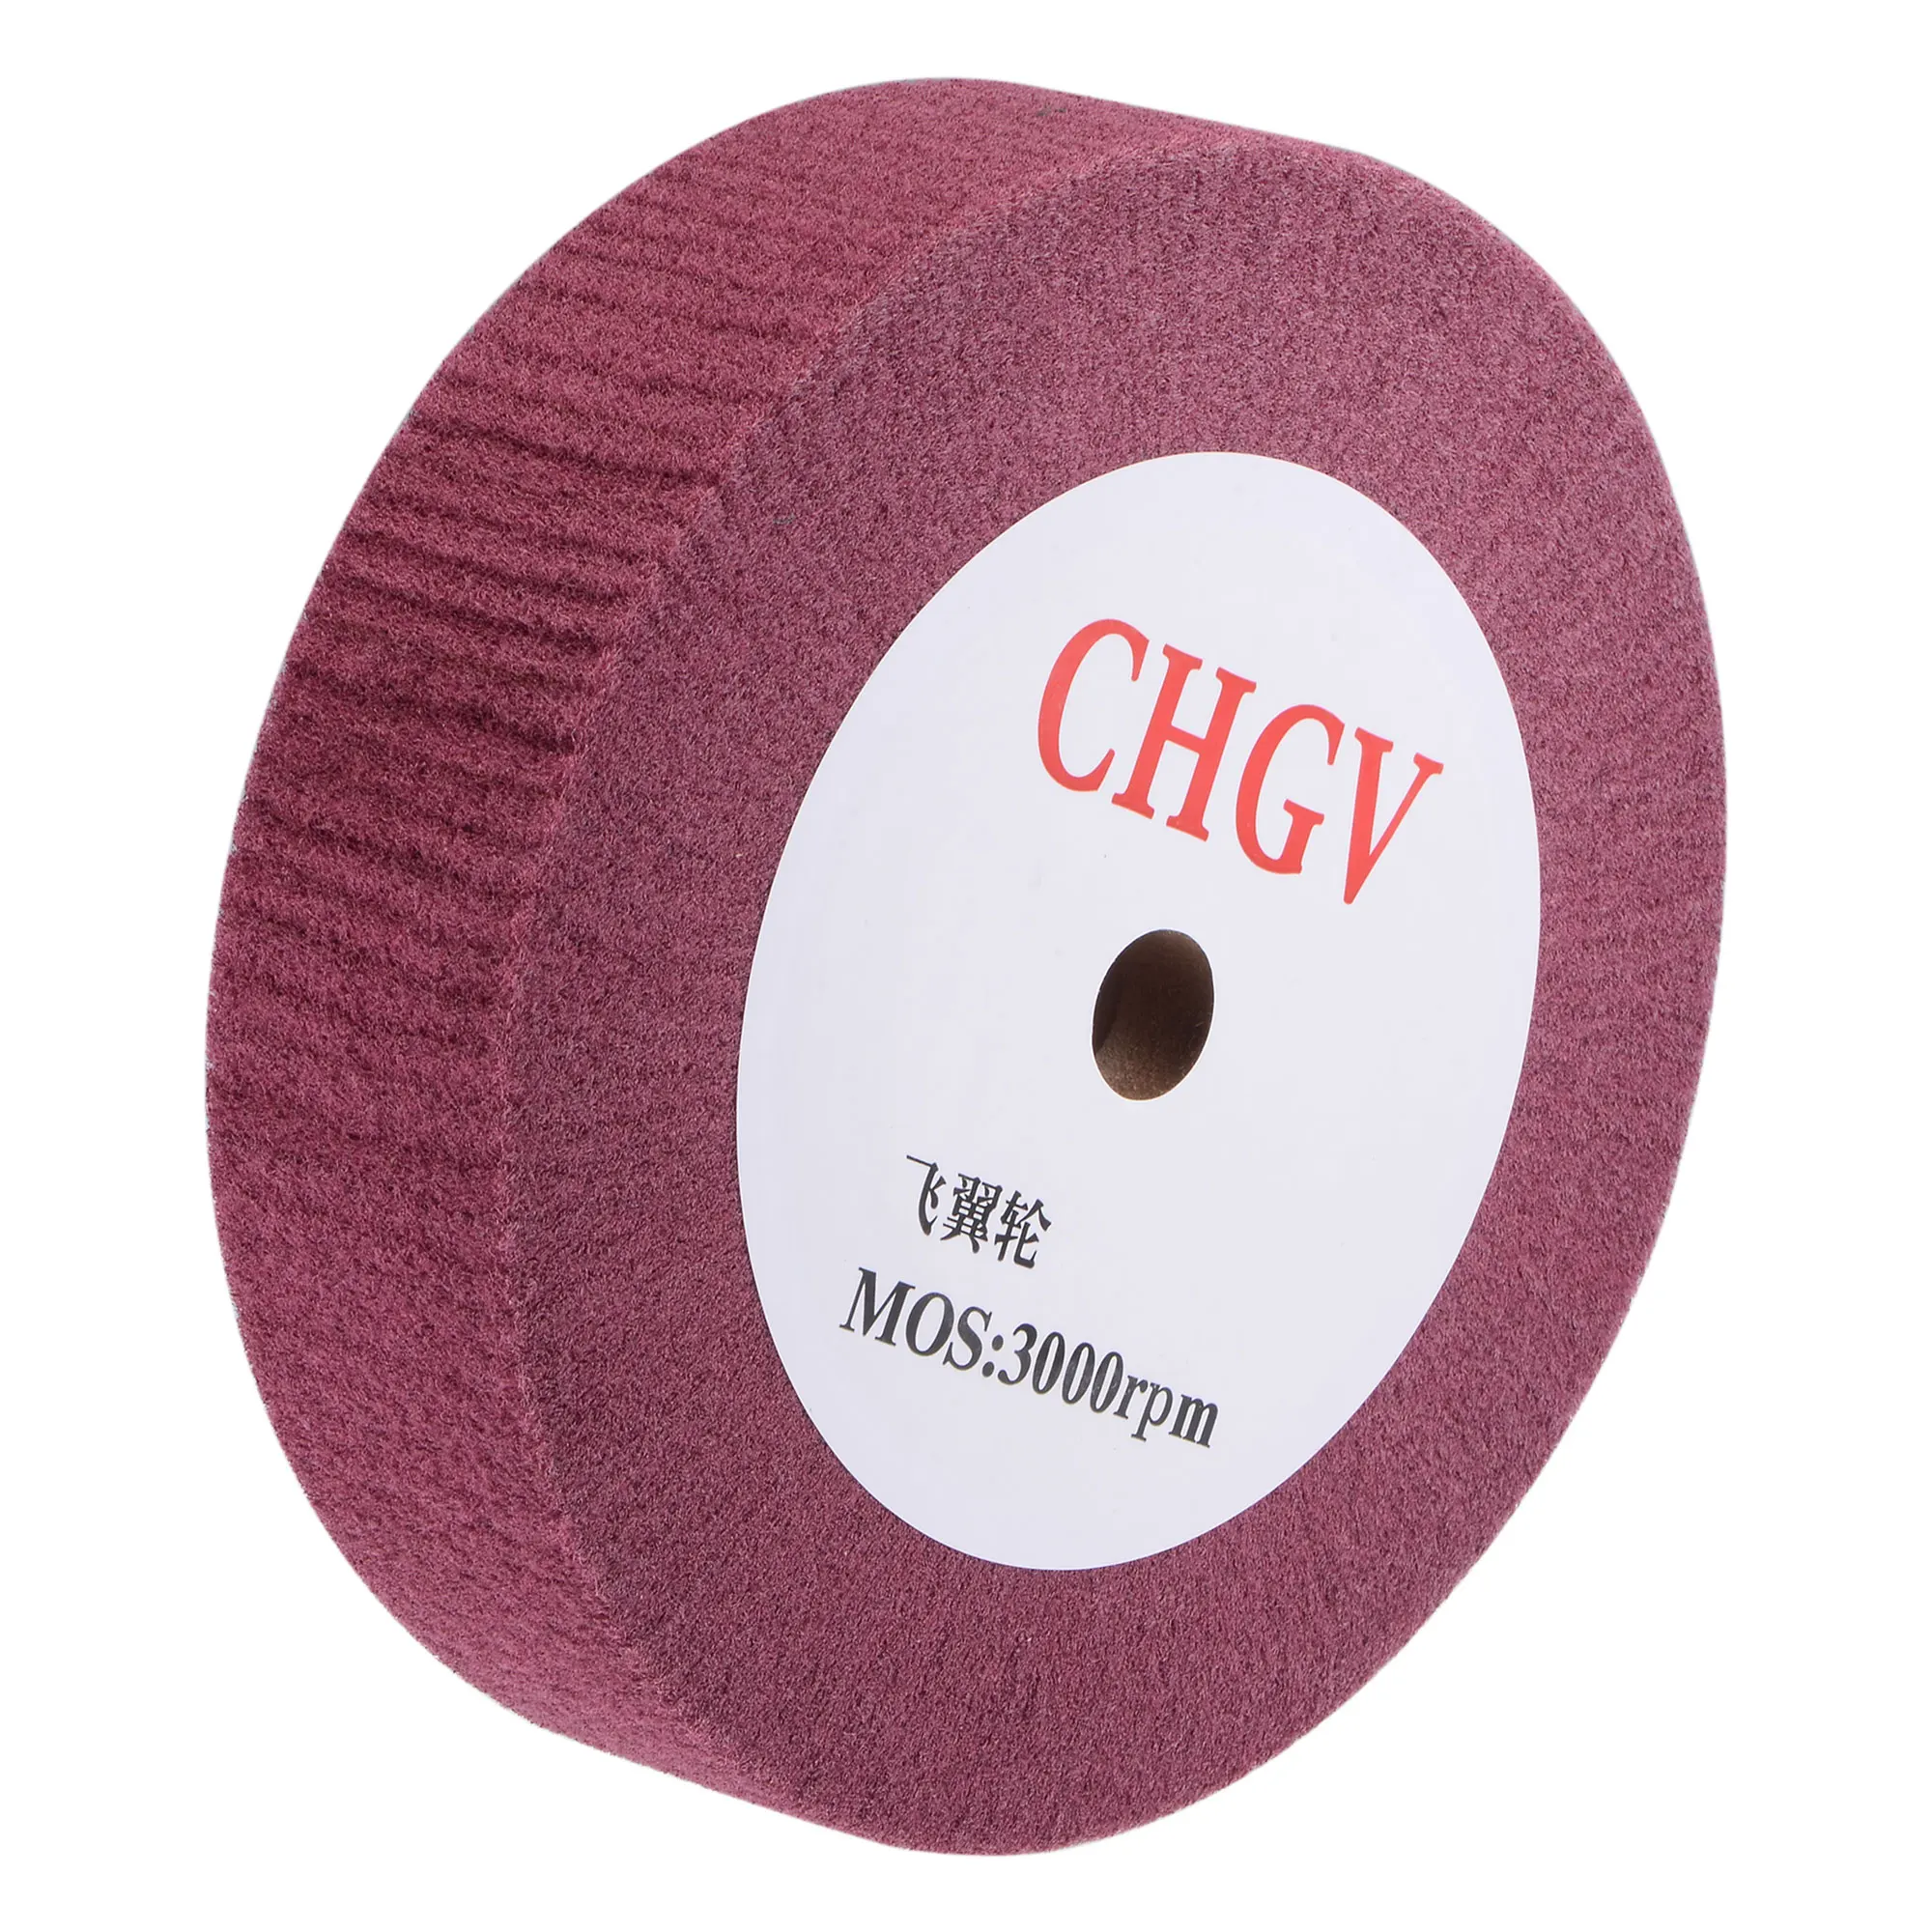 Uxcell 200mm x 50mm 320 Grit Non-Woven Polishing Burnishing Wheel Nylon Wire Drawing Abrasive Flap Wheel Red